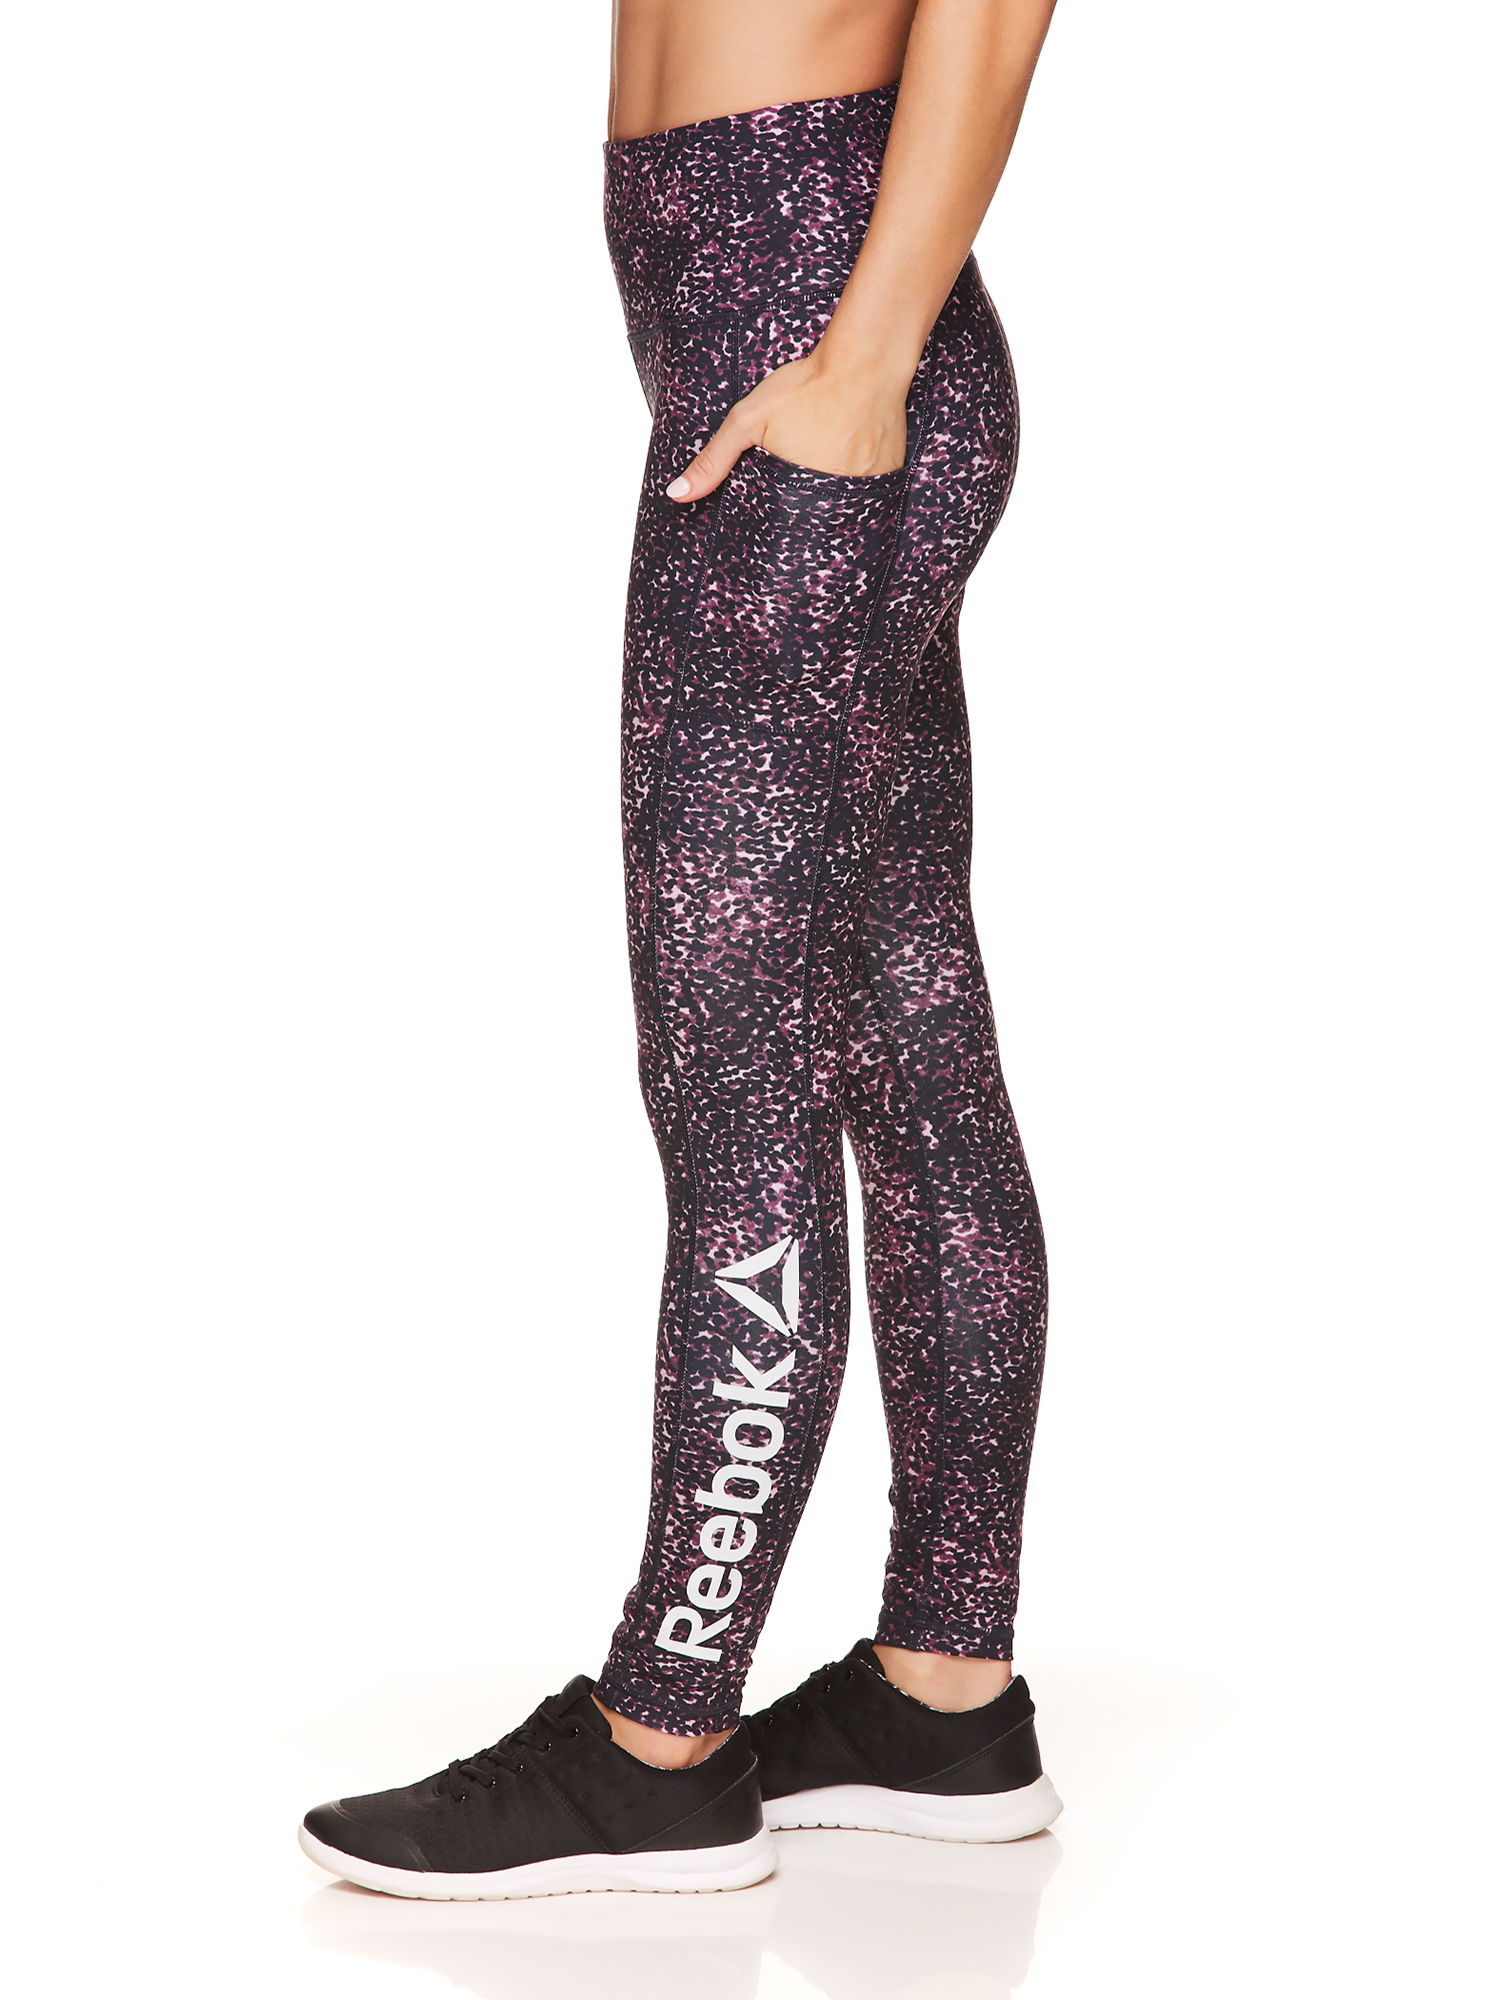 Reebok Womens High-Waisted Active Leggings with Pockets, Dotty Animal Graphic - image 4 of 4